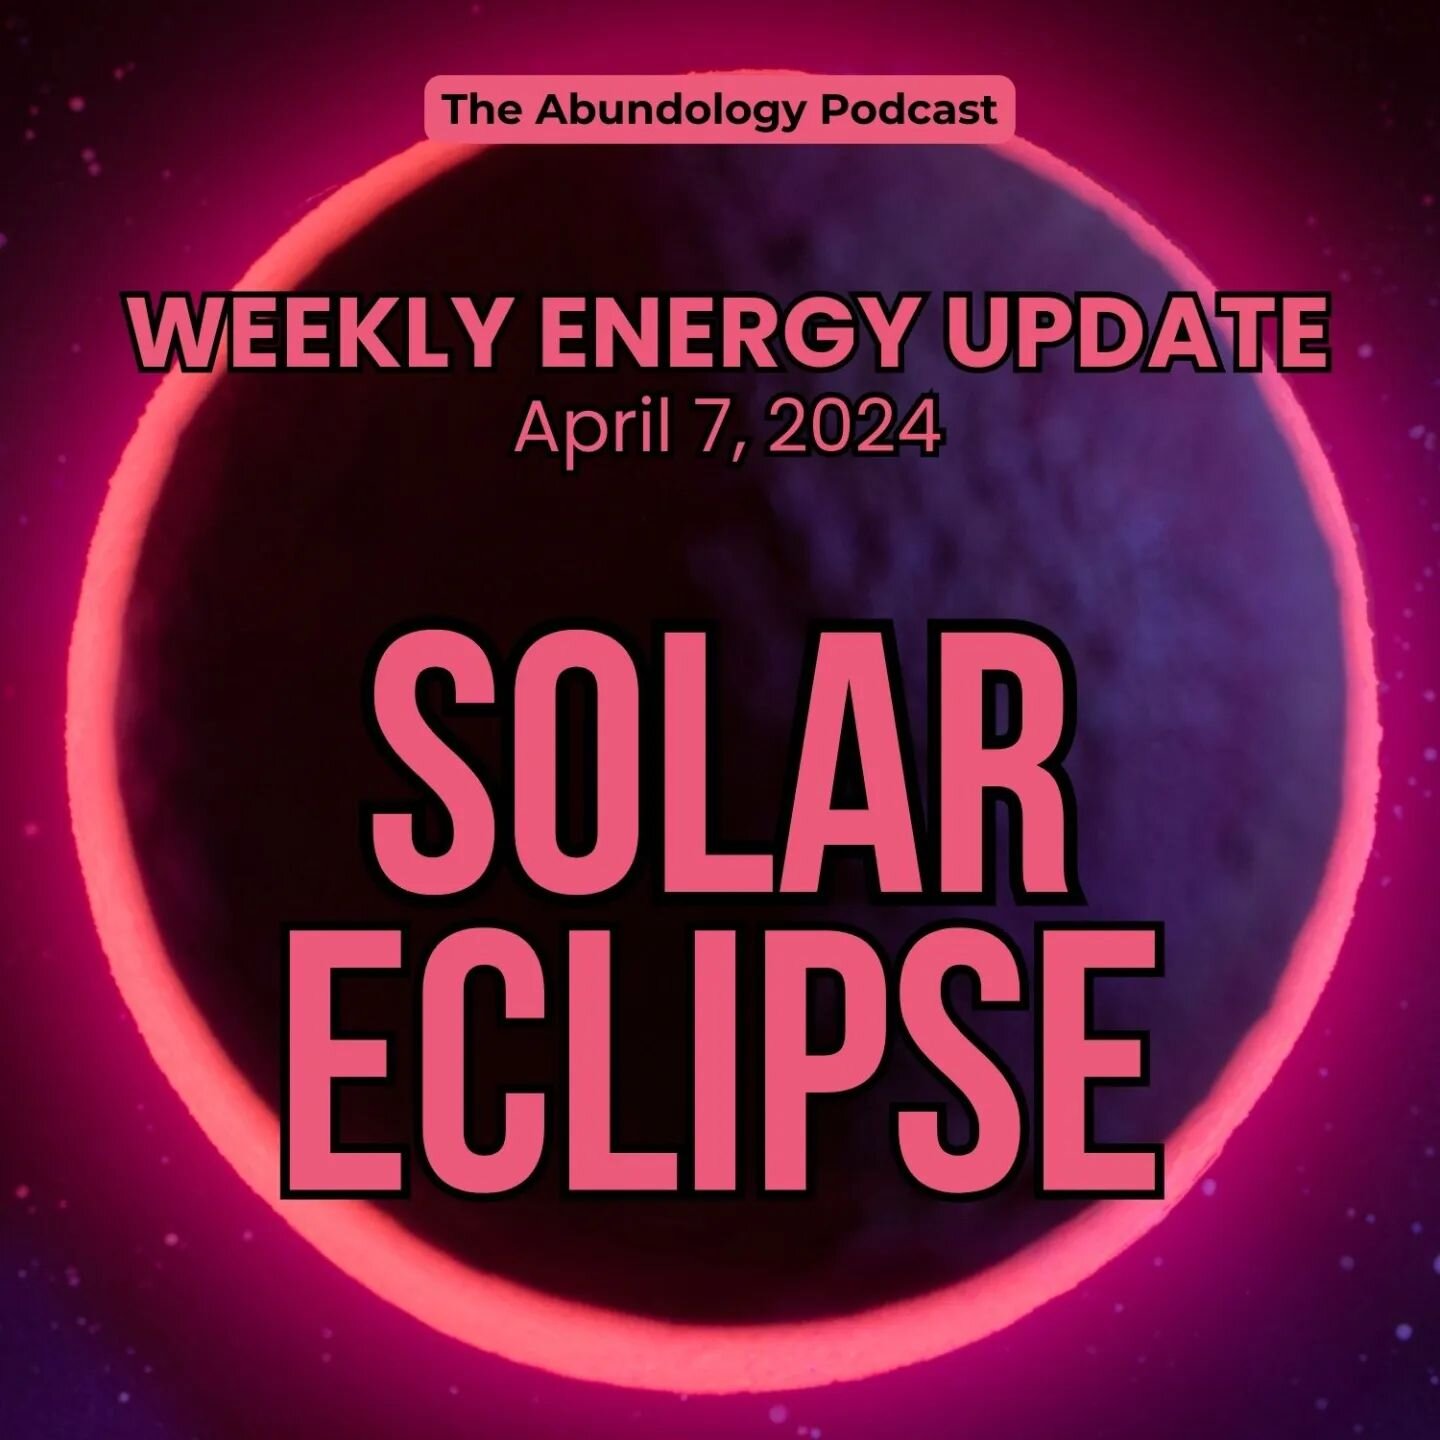 The Weekly Energy Update Podcast is Up!&nbsp;💥

Get your eclipse glasses ready. The magical day we've been waiting for all year is tomorrow, Monday, April 8, when there will be a Total Solar Eclipse in Aries.

During solar eclipses, the moon is dire